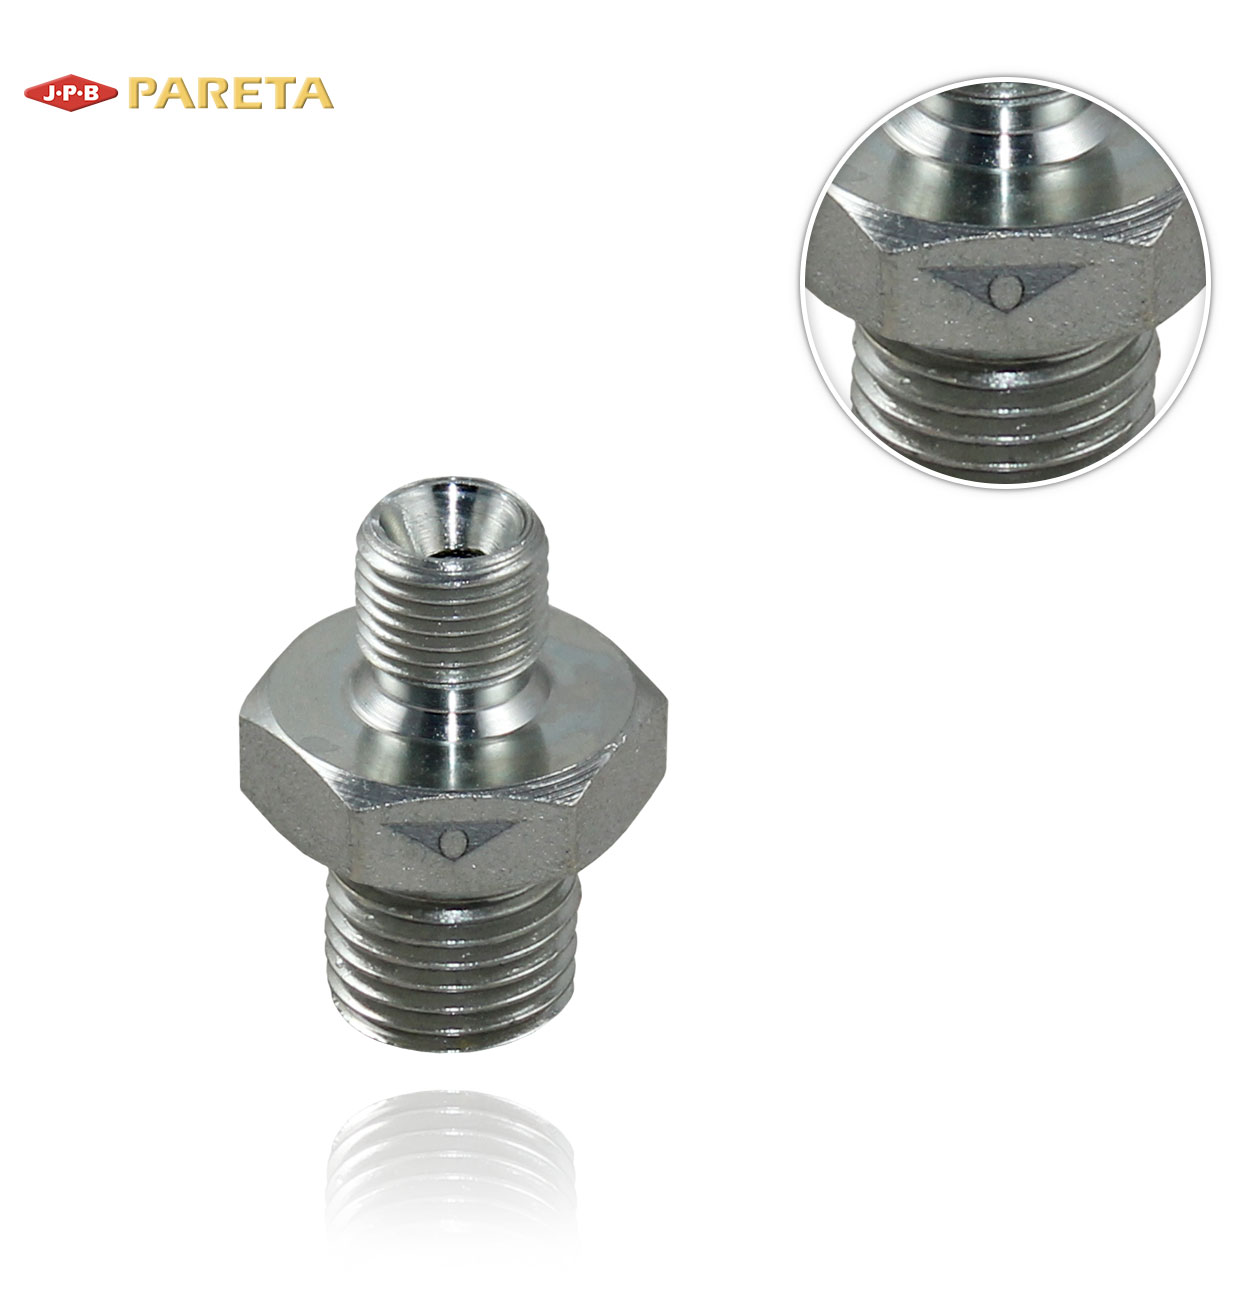 SW14 1/8"M CONICAL x 1/4"M CONICAL CONNECTOR